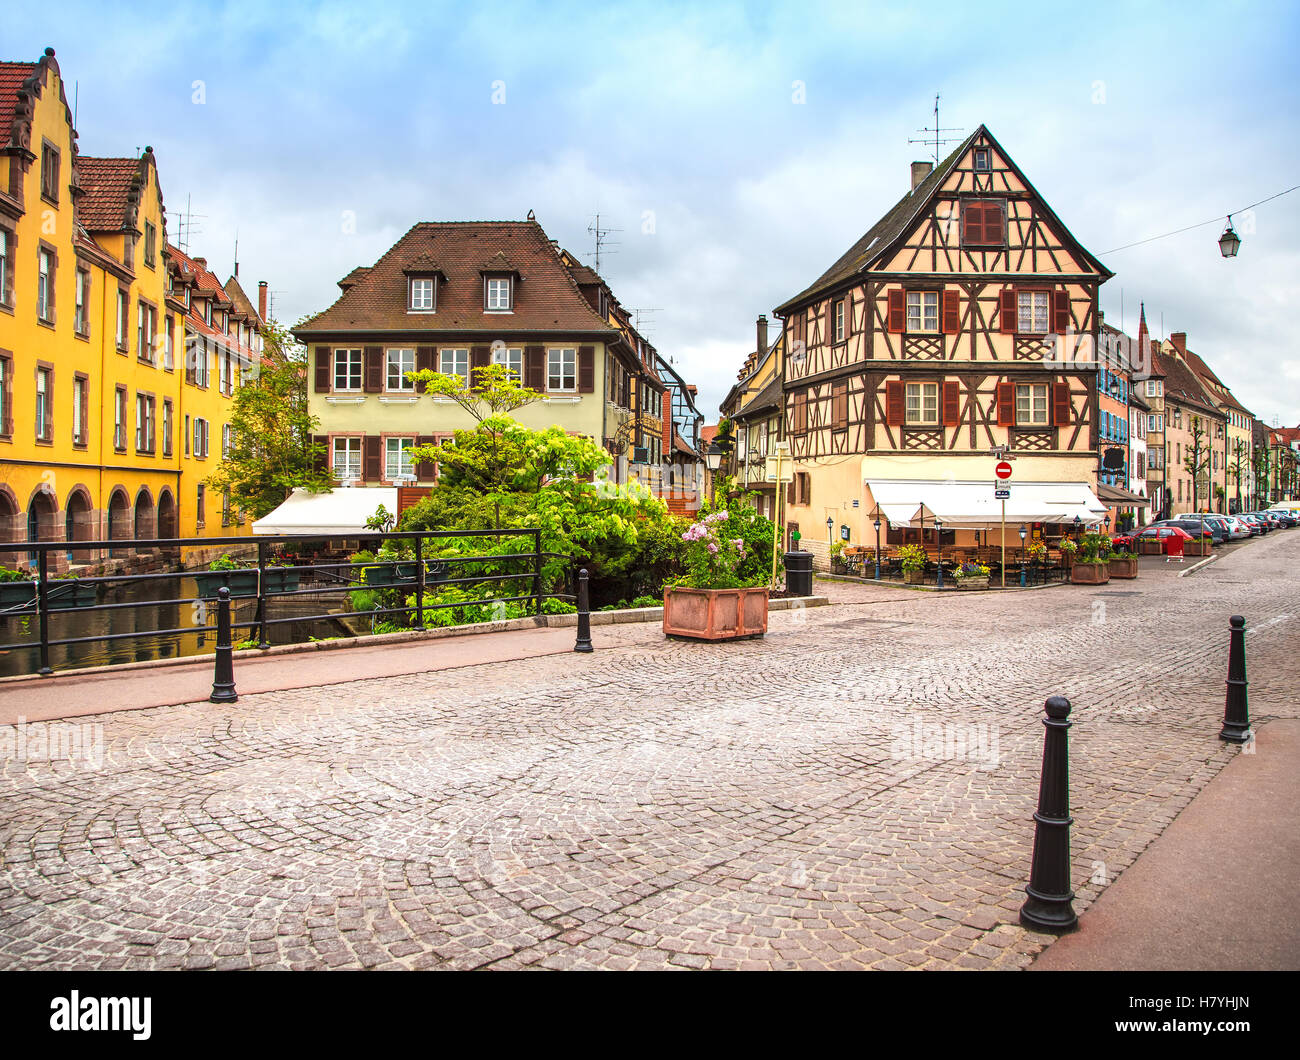 Colmar, Petit Venice, canal bridge and traditional half timbered colorful houses. Alsace, France. Stock Photo